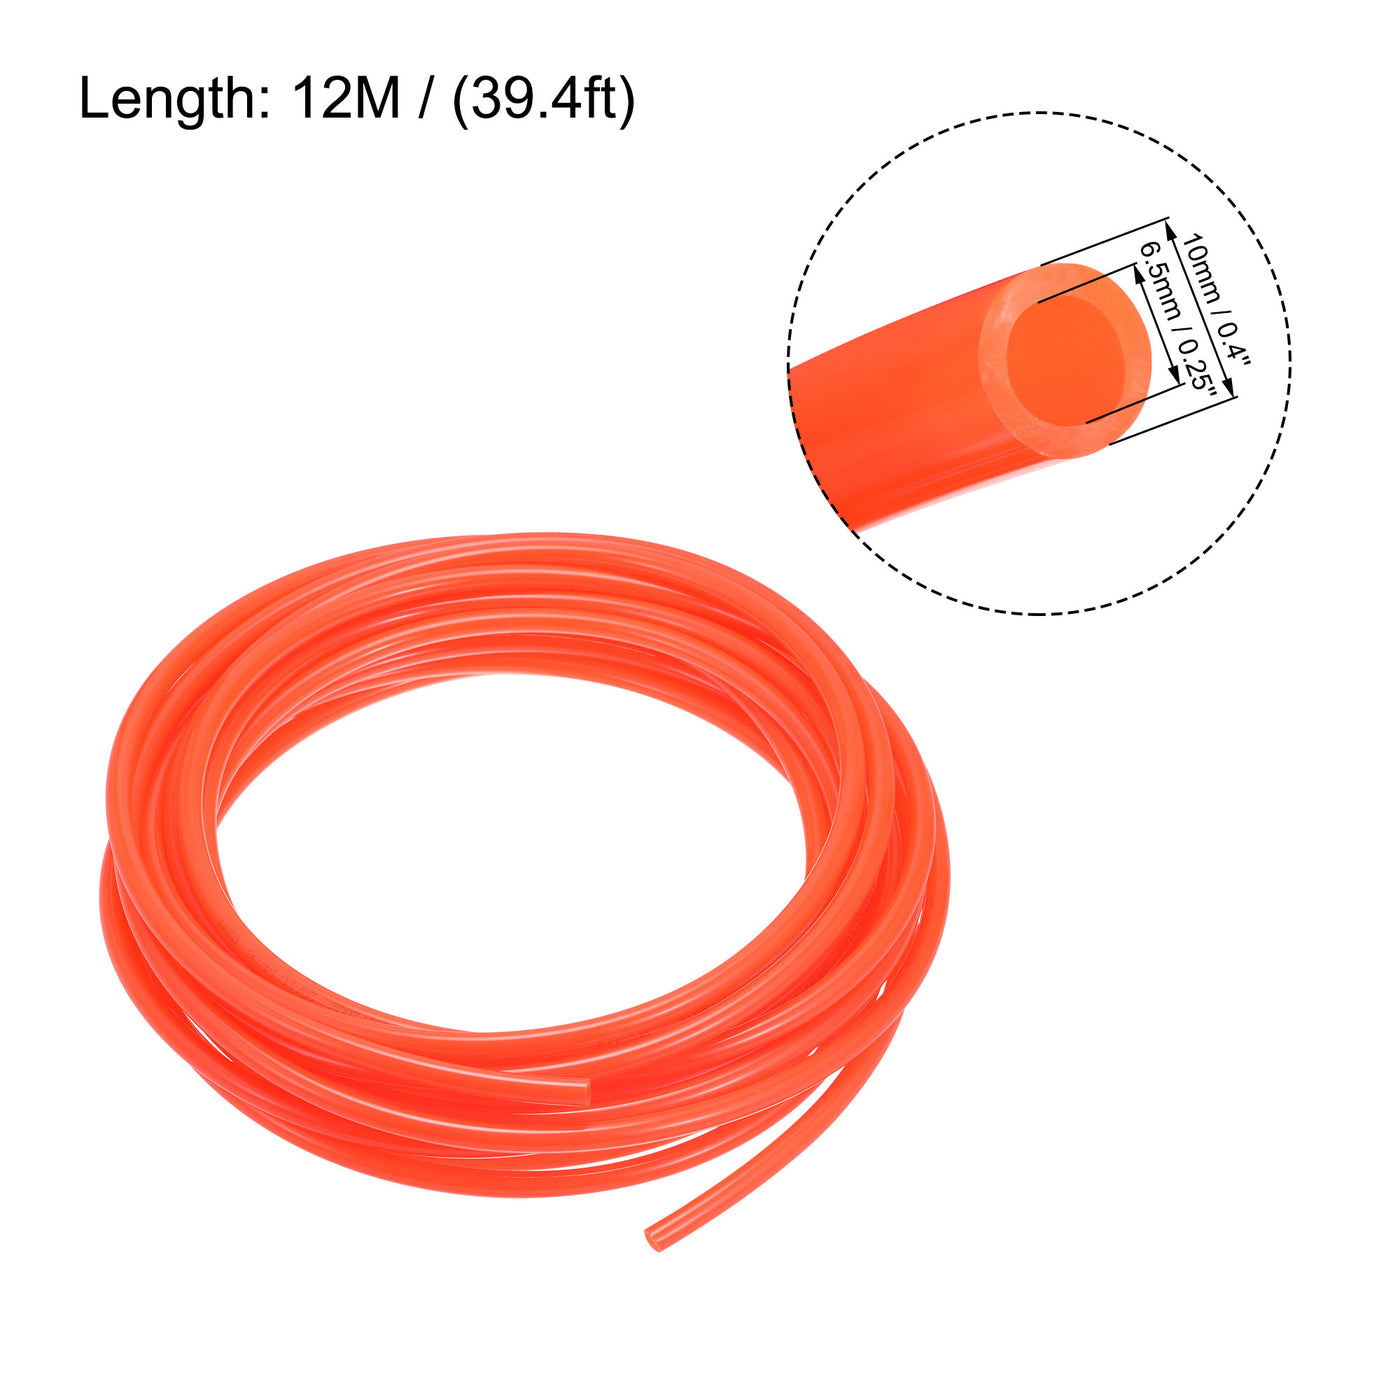 uxcell Uxcell Pneumatic Air Hose Tubing Air Compressor Tube 6.5mm/0.25''ID x 10mm/0.4''OD x 12m/39.4Ft Polyurethane Pipe Bright Orange